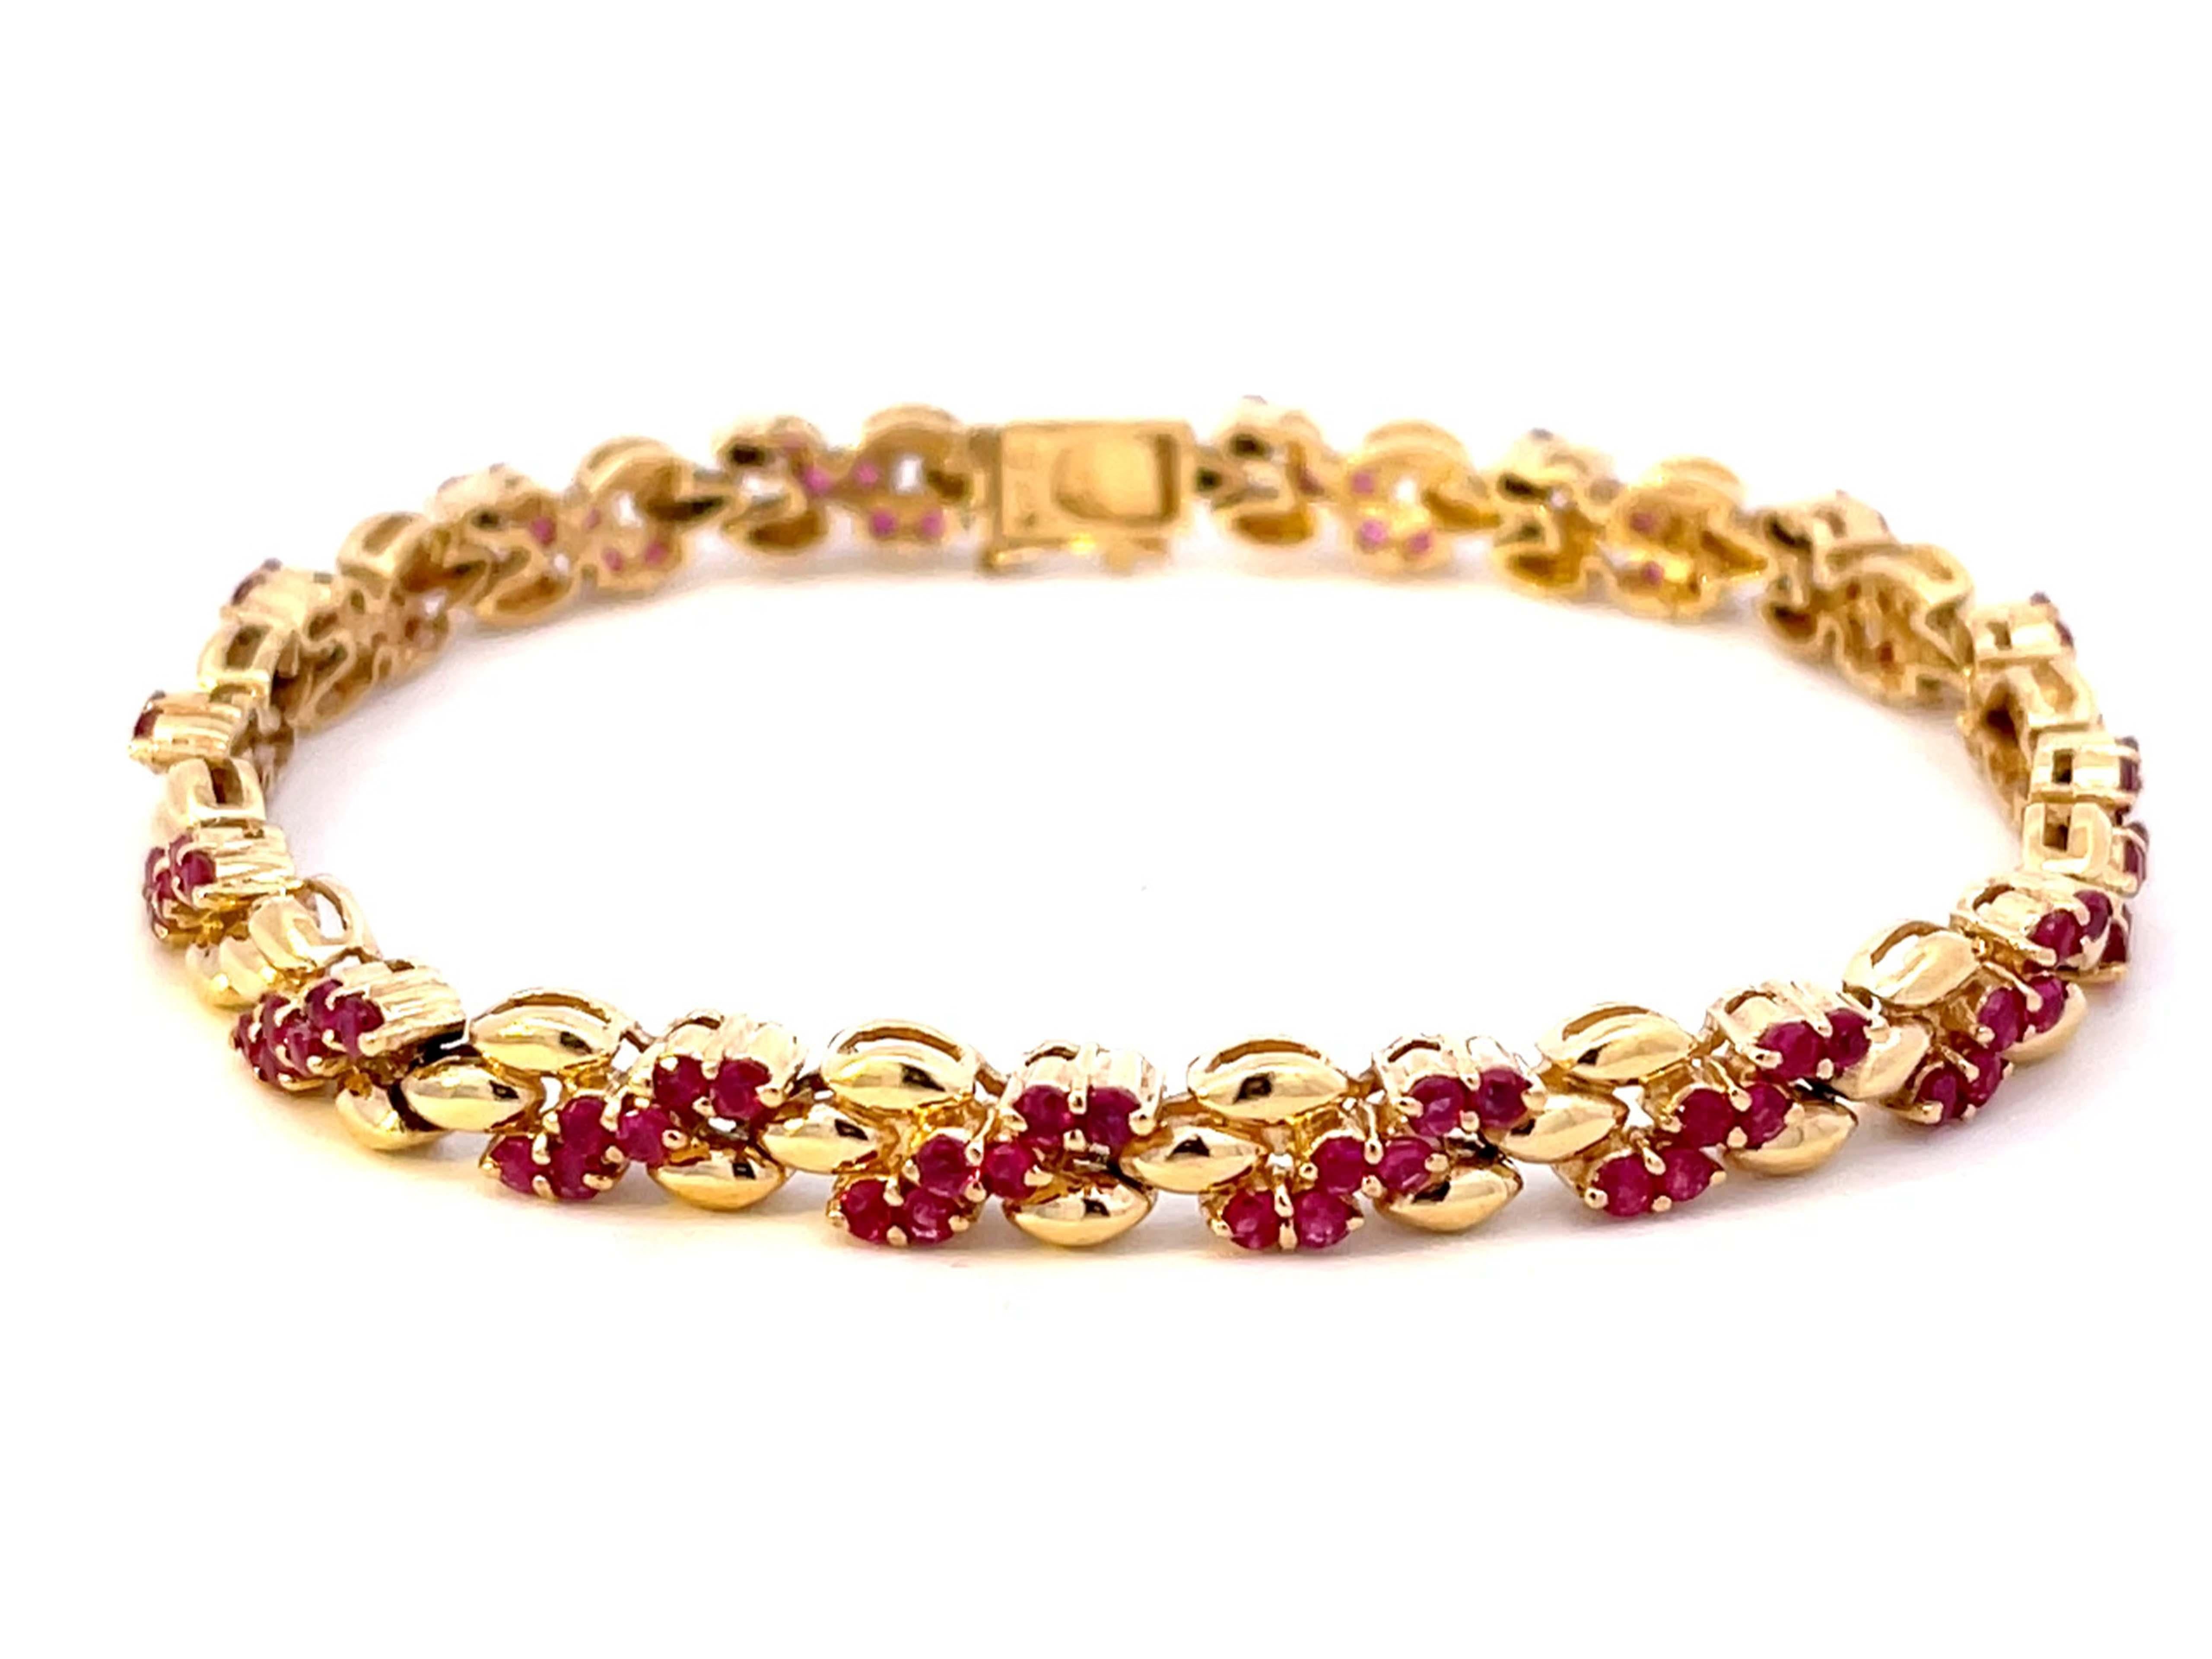 Bracelet Specifications:

Metal: 14k Yellow Gold

Gemstones: red rubies 

Red Ruby Carat Weight: 2.80 carats

Red Ruby Count: 96

Bracelet Length: ~6.5 inches

Bracelet Width: ~ 5.68 mm

Total Weight: 13.6 Grams

Condition: Vintage,